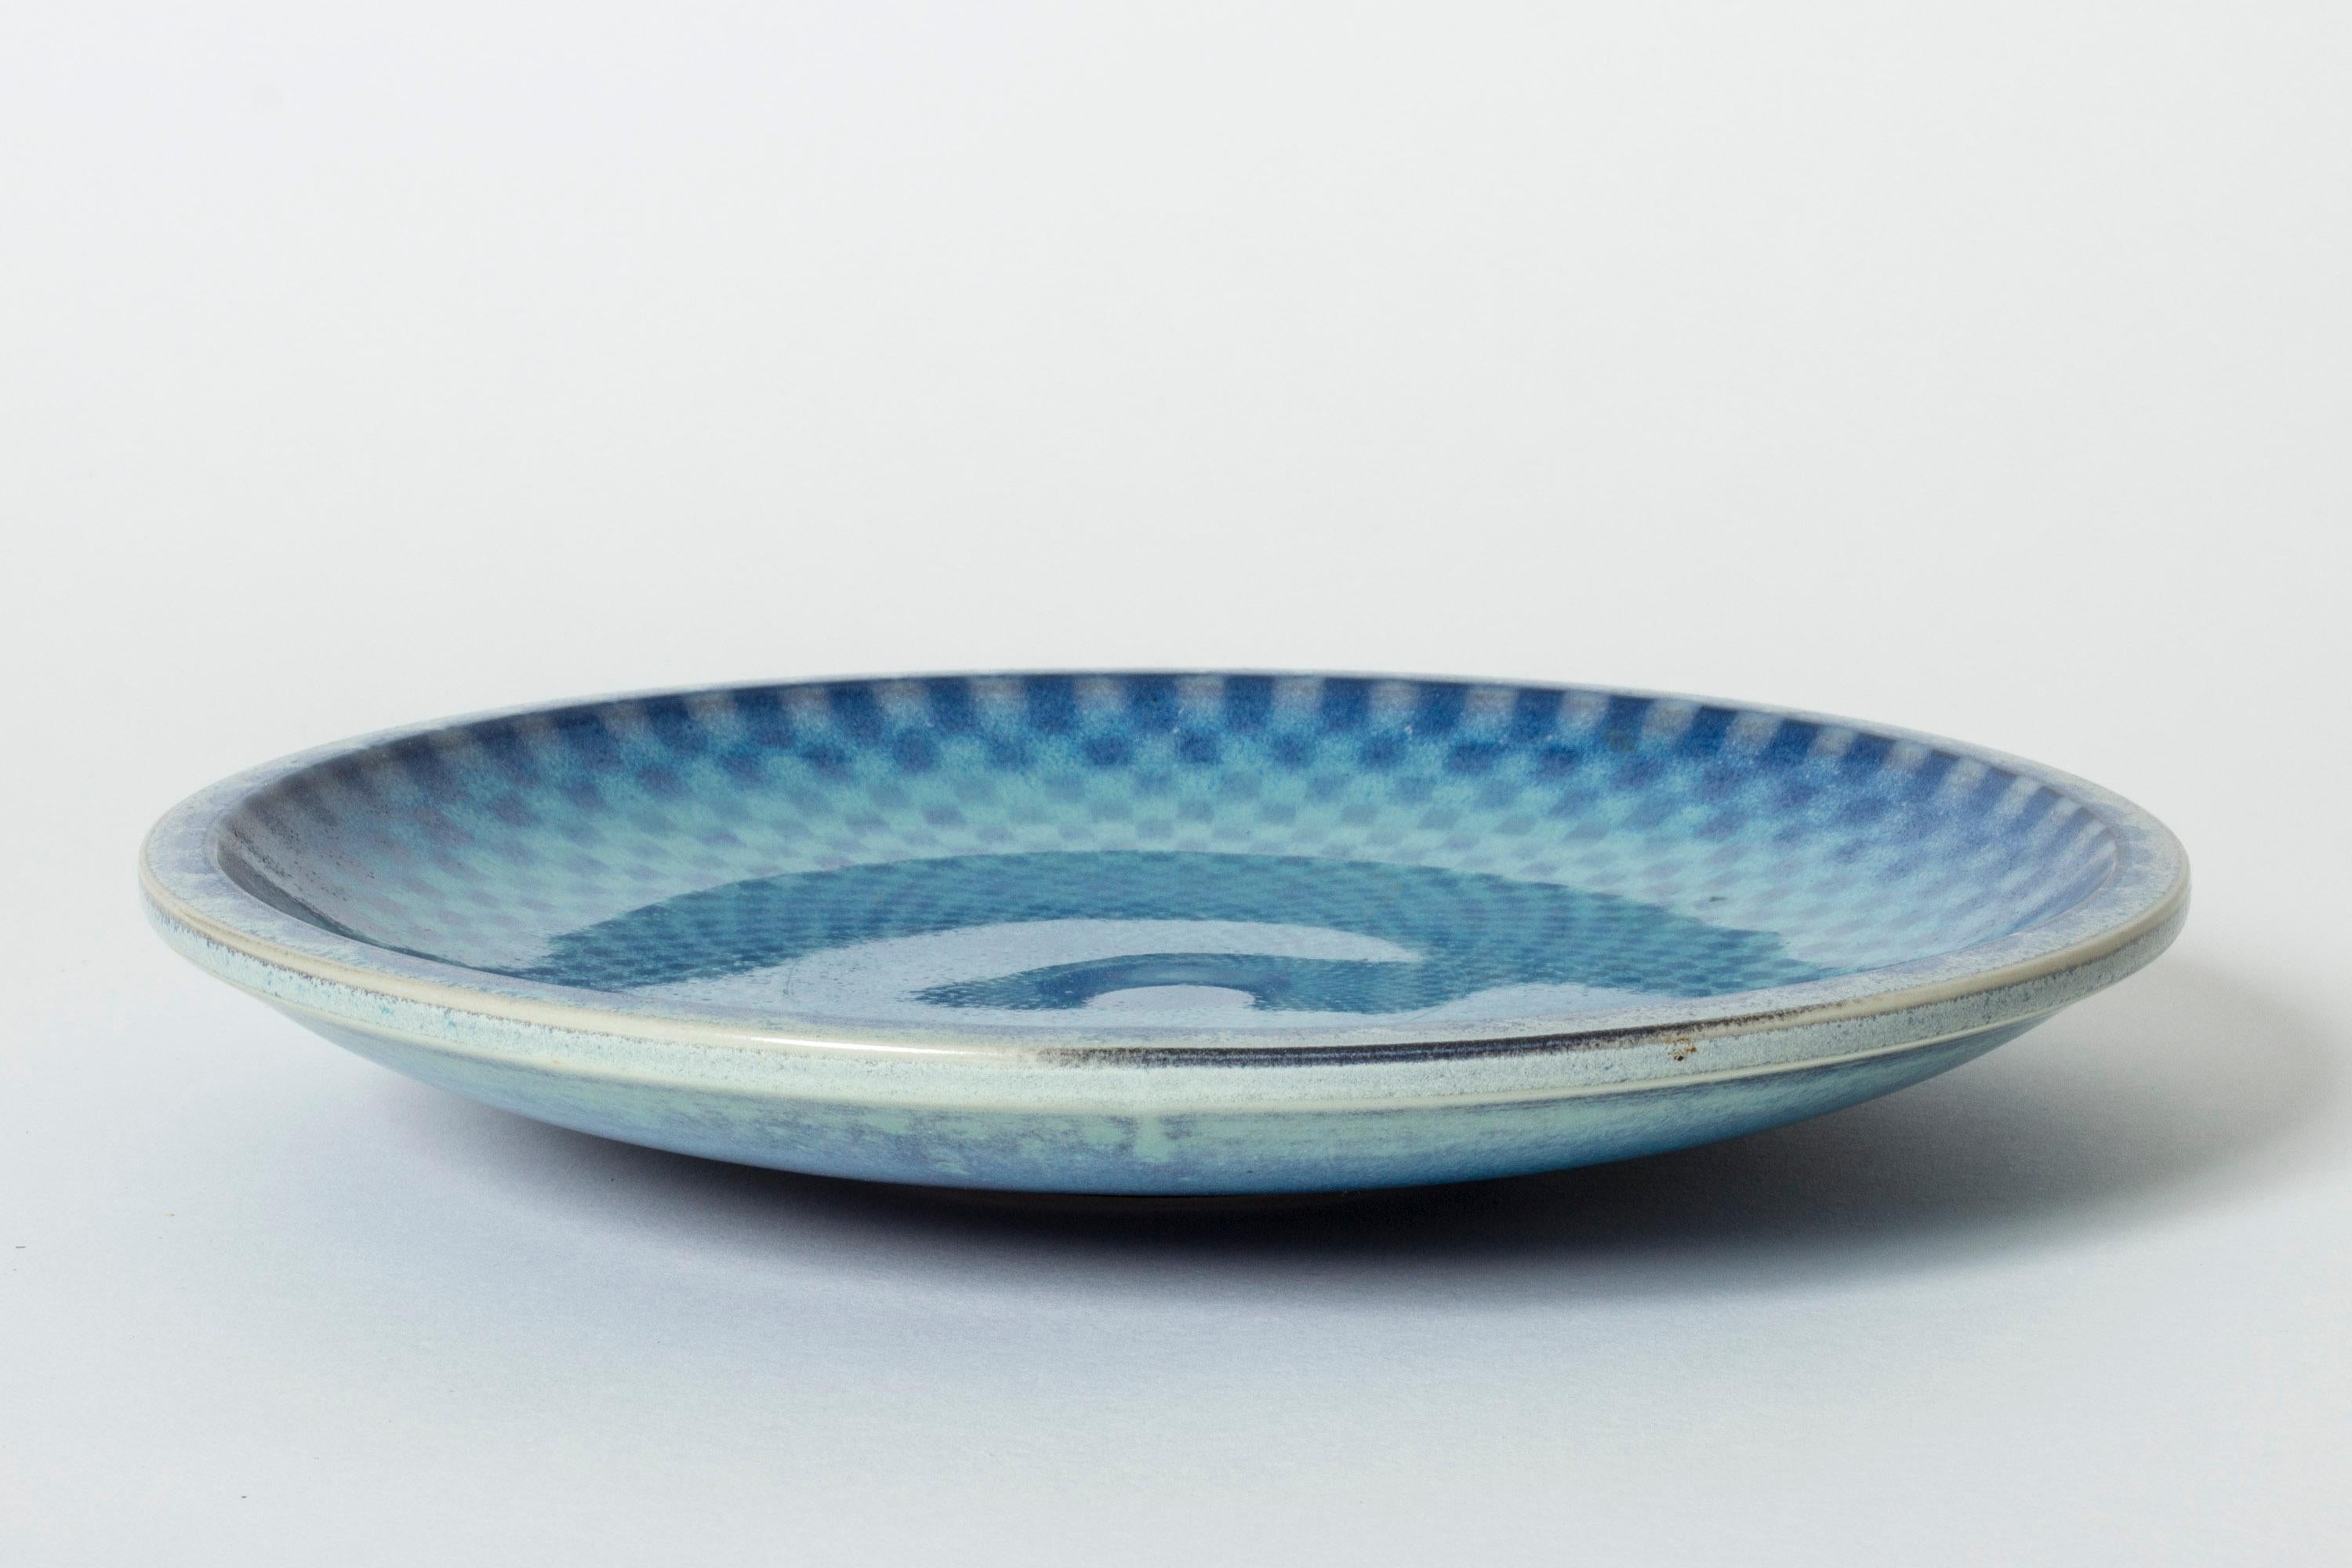 Striking stoneware platter by Berndt Friberg, with a checkered decor in aquamarine, blue and purple. Heavy quality.

Berndt Friberg was a Swedish ceramicist, renowned for his stoneware vases and vessels for Gustavsberg. His pure, composed designs